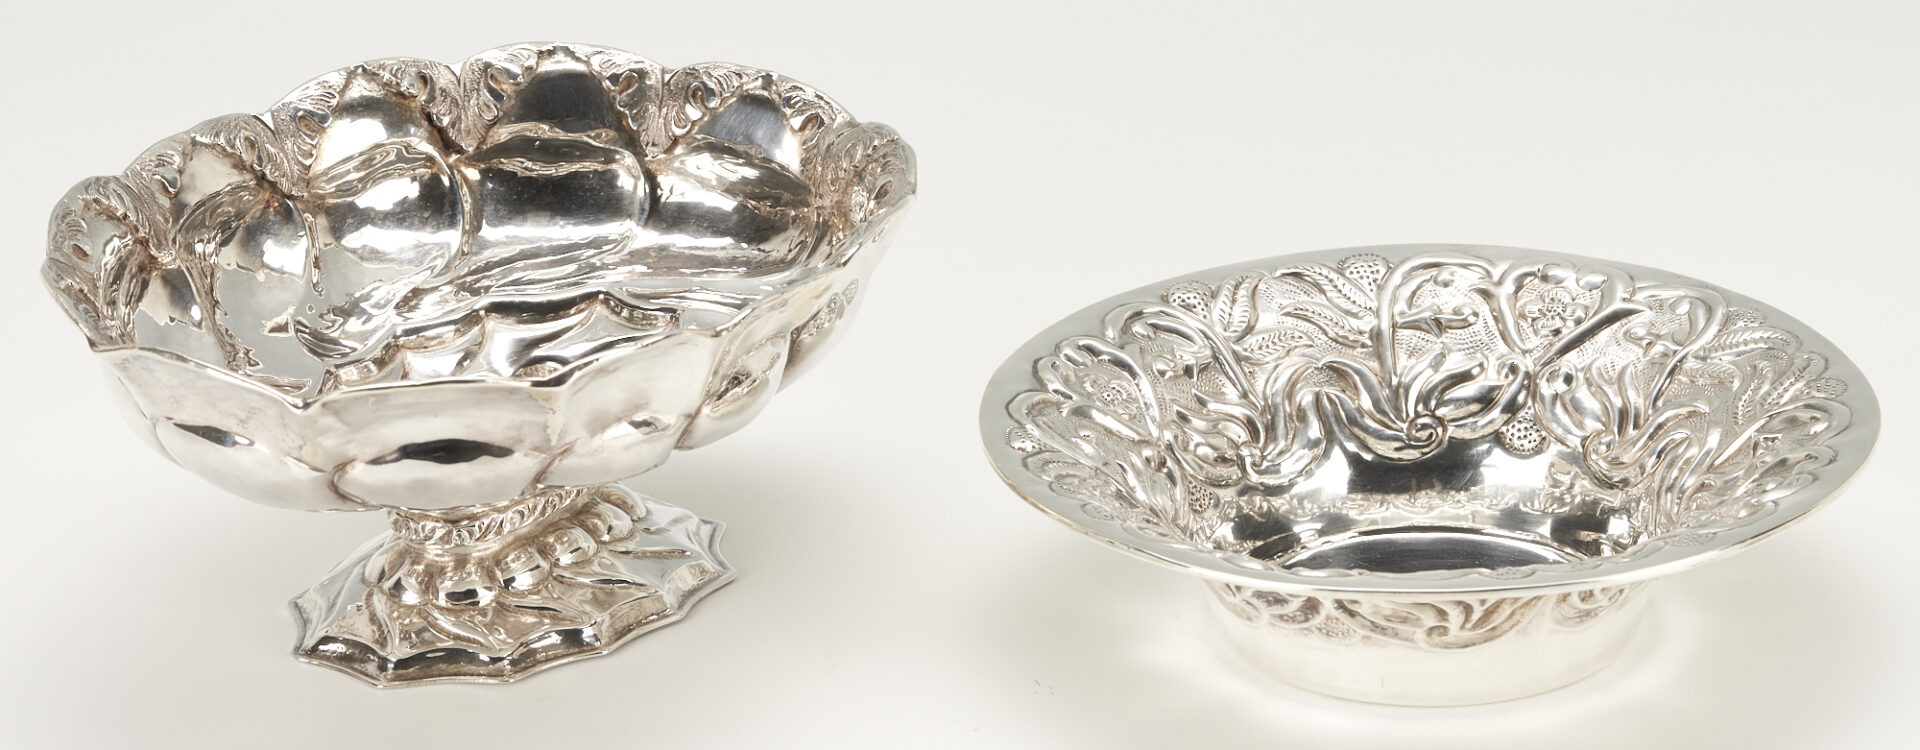 Lot 1095: 3 Sterling Silver Hollowware Items, incl. Gorham & Mexican